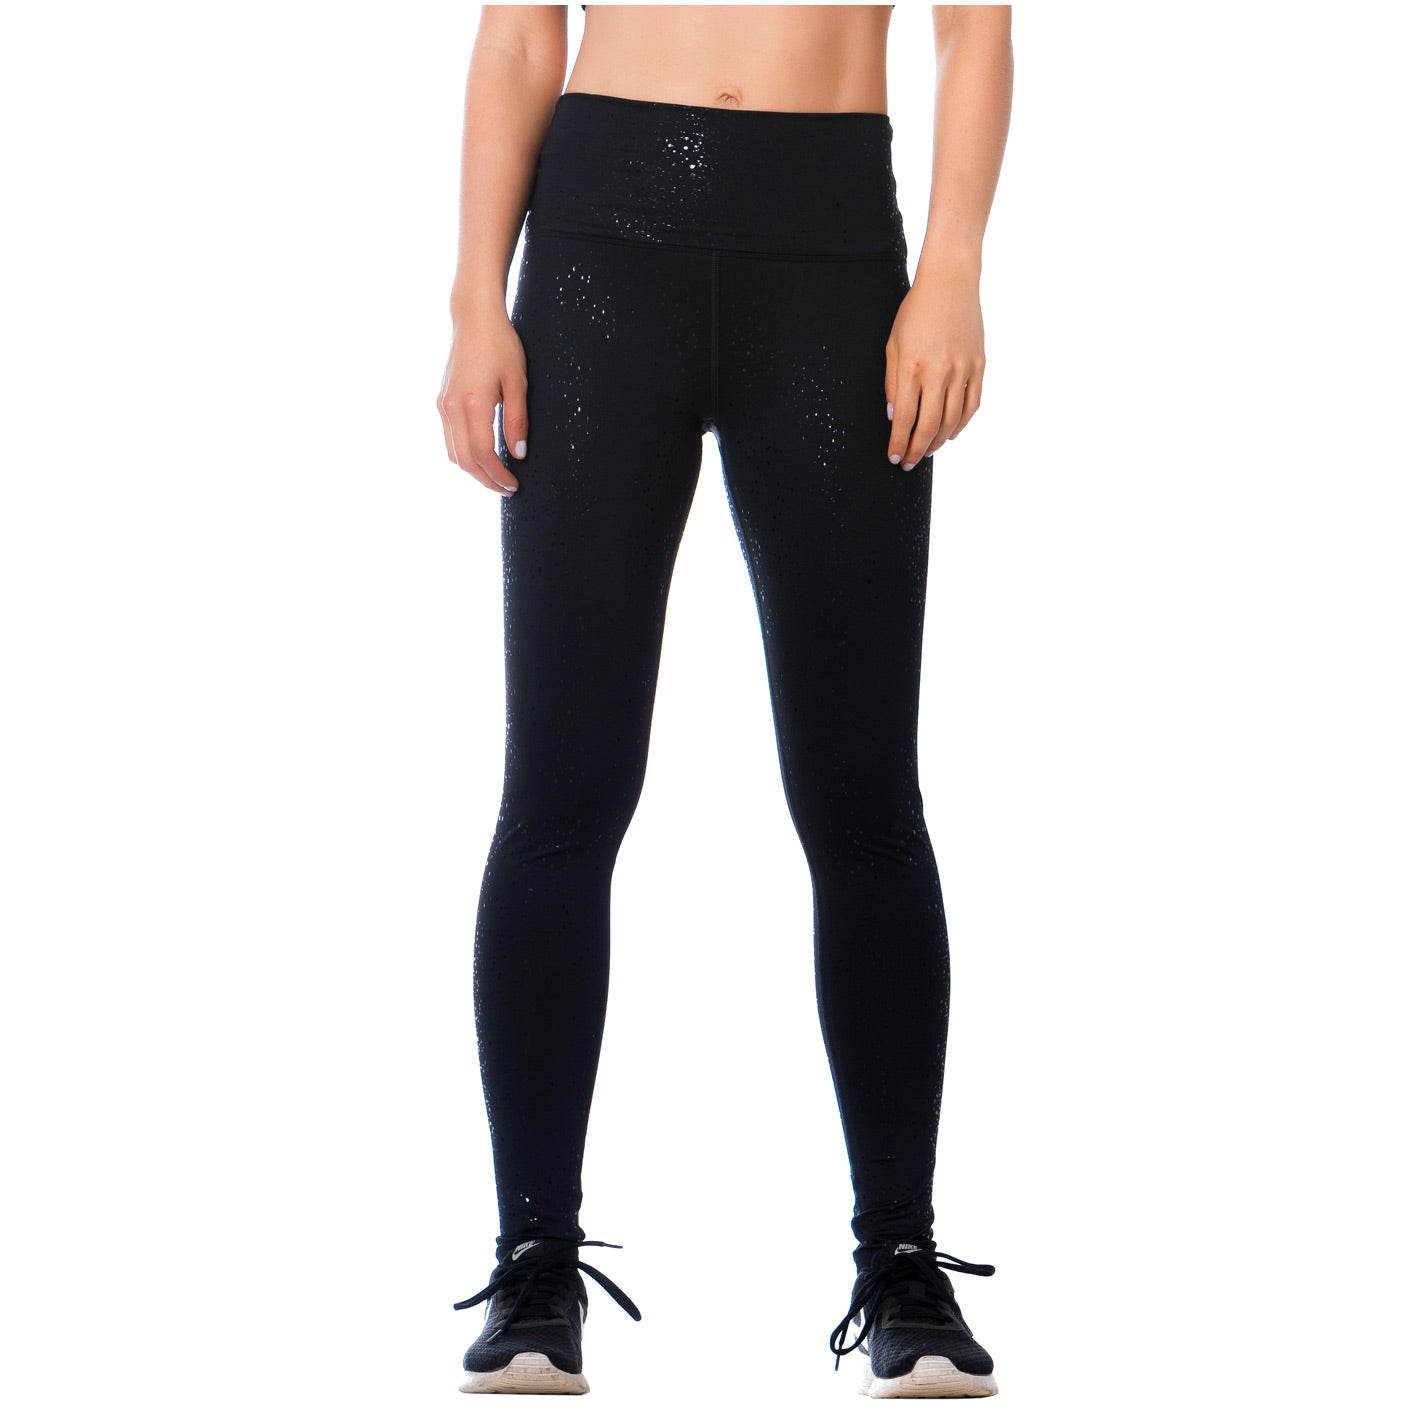 FlexMee 946172 | Colombian High Waisted Leggings for Women in Black | Chica Sexy